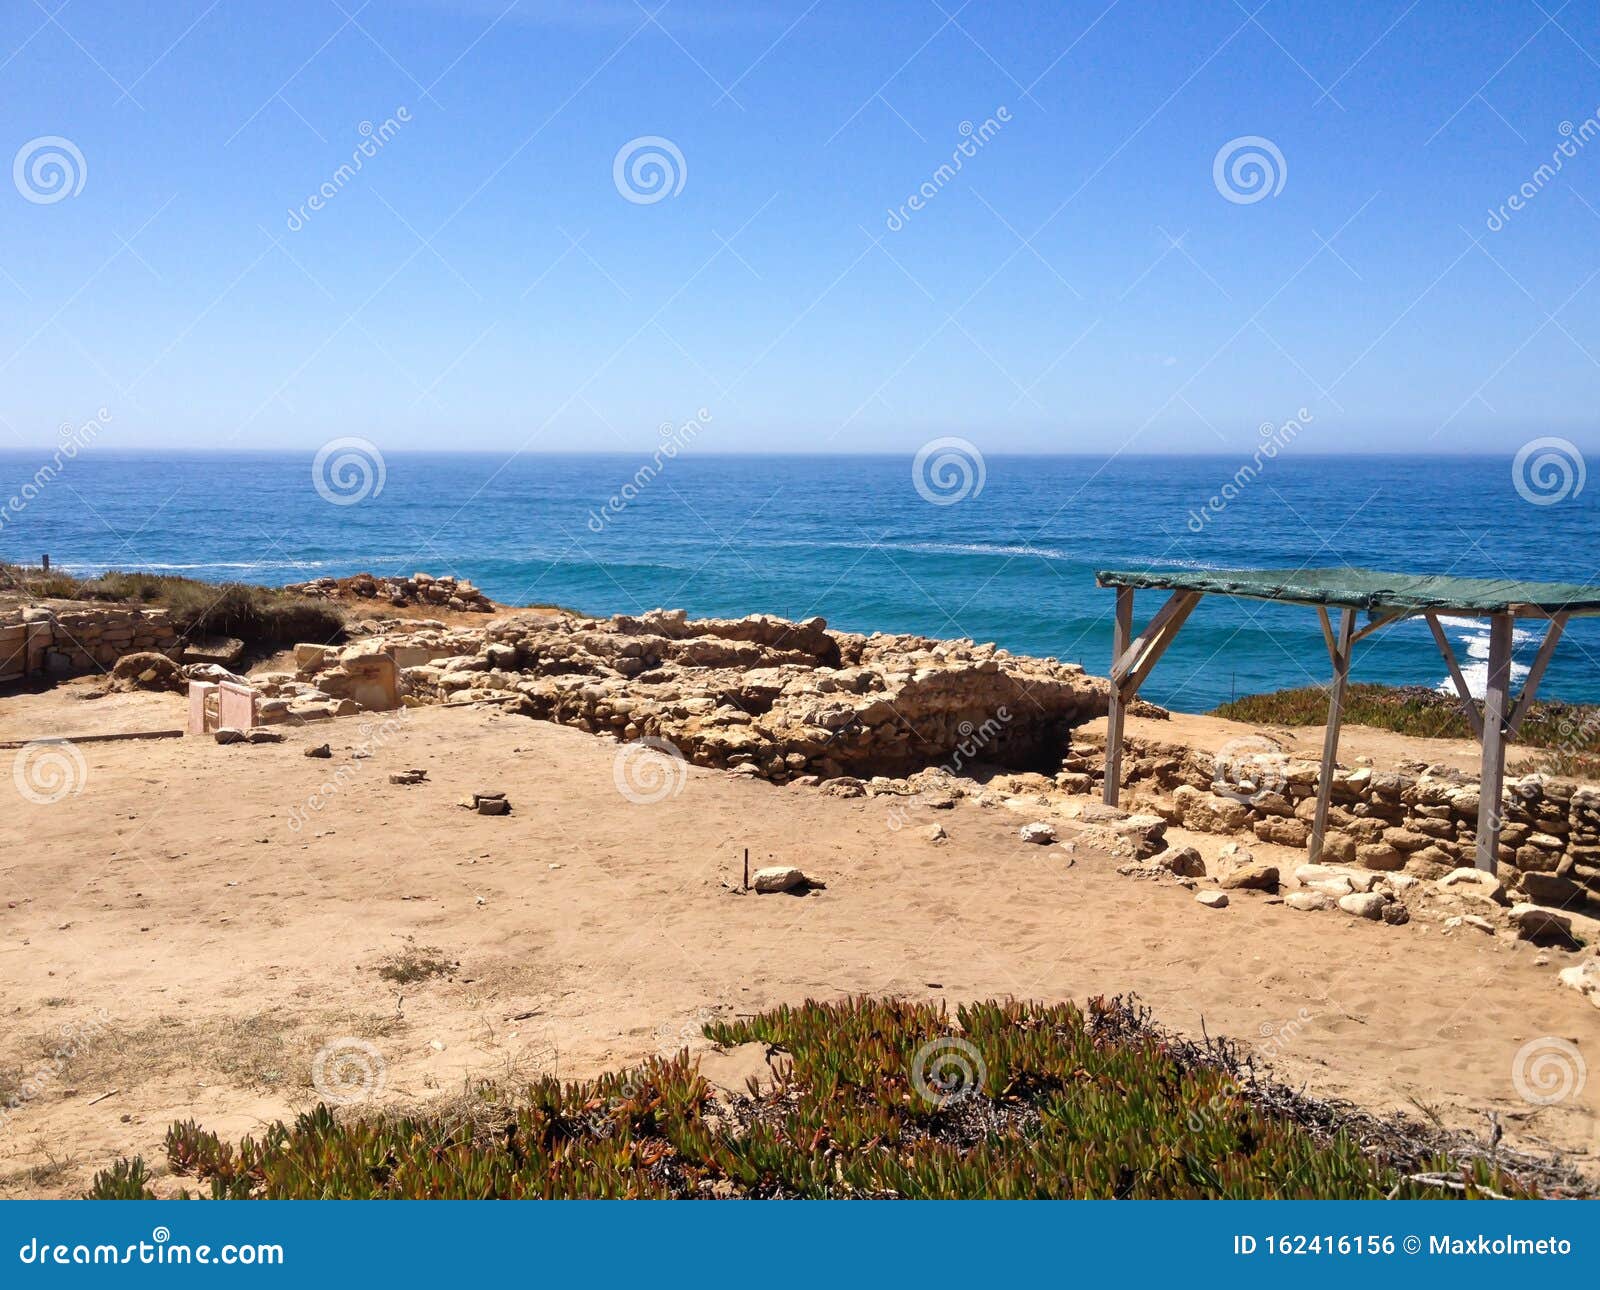 Archaeological Excavations Of Sand On The Ocean Shore With The Horizon View Stock Photo Image Of Antiquity Artifacts